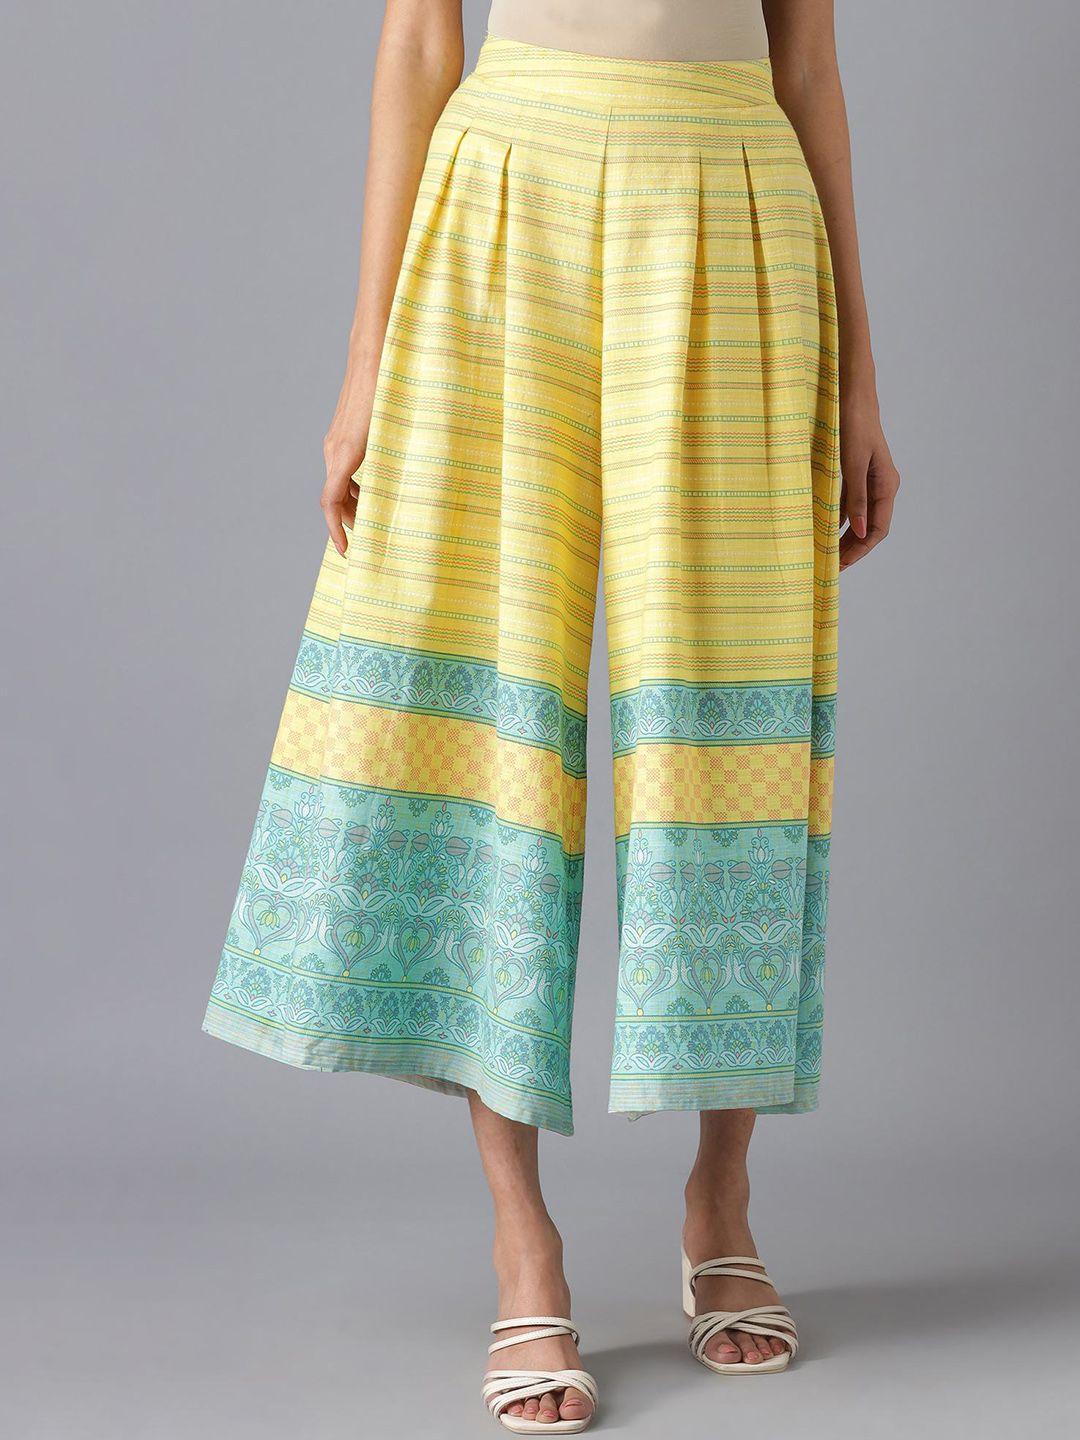 aurelia-women-yellow-ethnic-motifs-printed-loose-fit-culottes-trousers